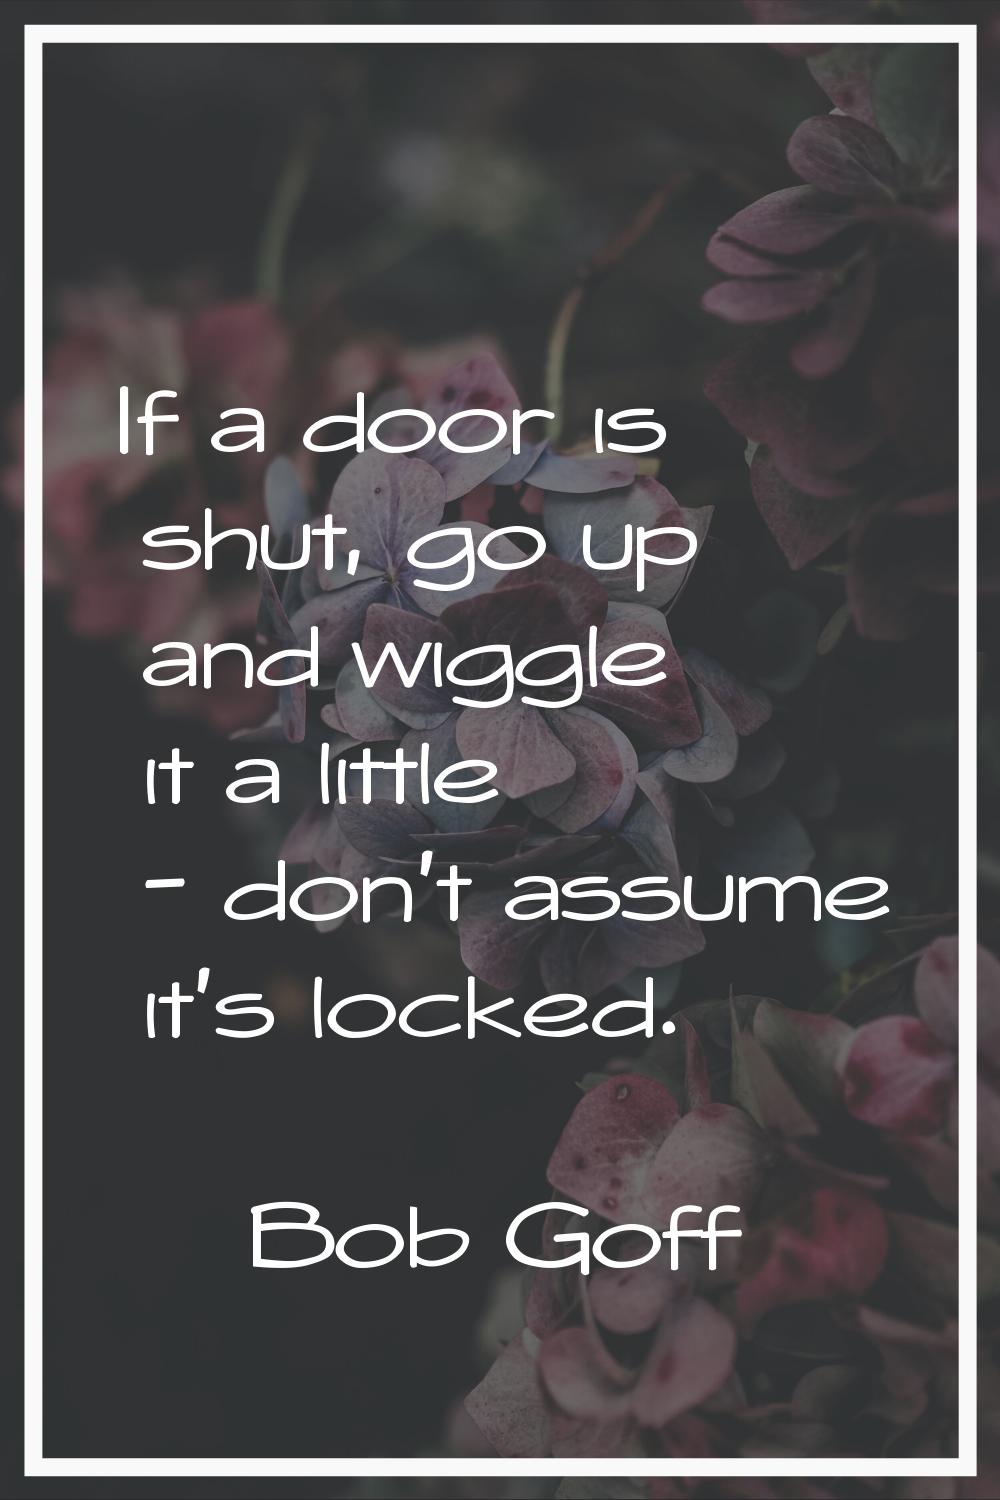 If a door is shut, go up and wiggle it a little - don't assume it's locked.